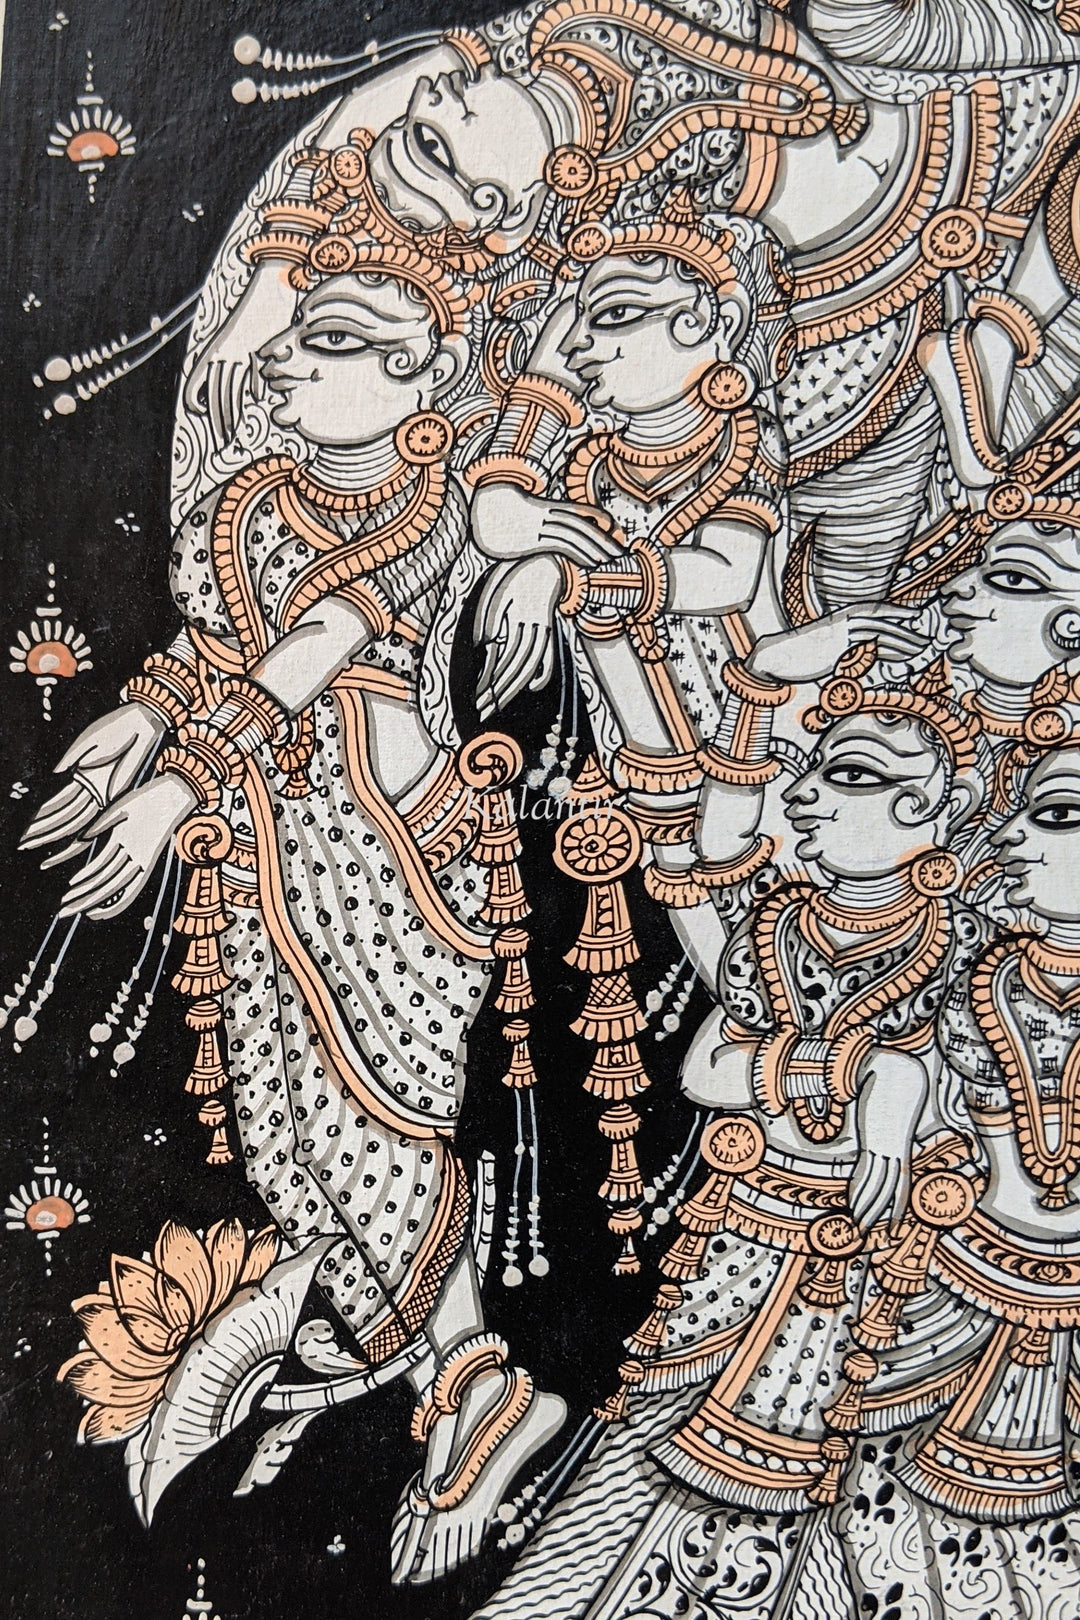 Lord Krishna Playing Flute With Gopikas | Pattachitra Painting